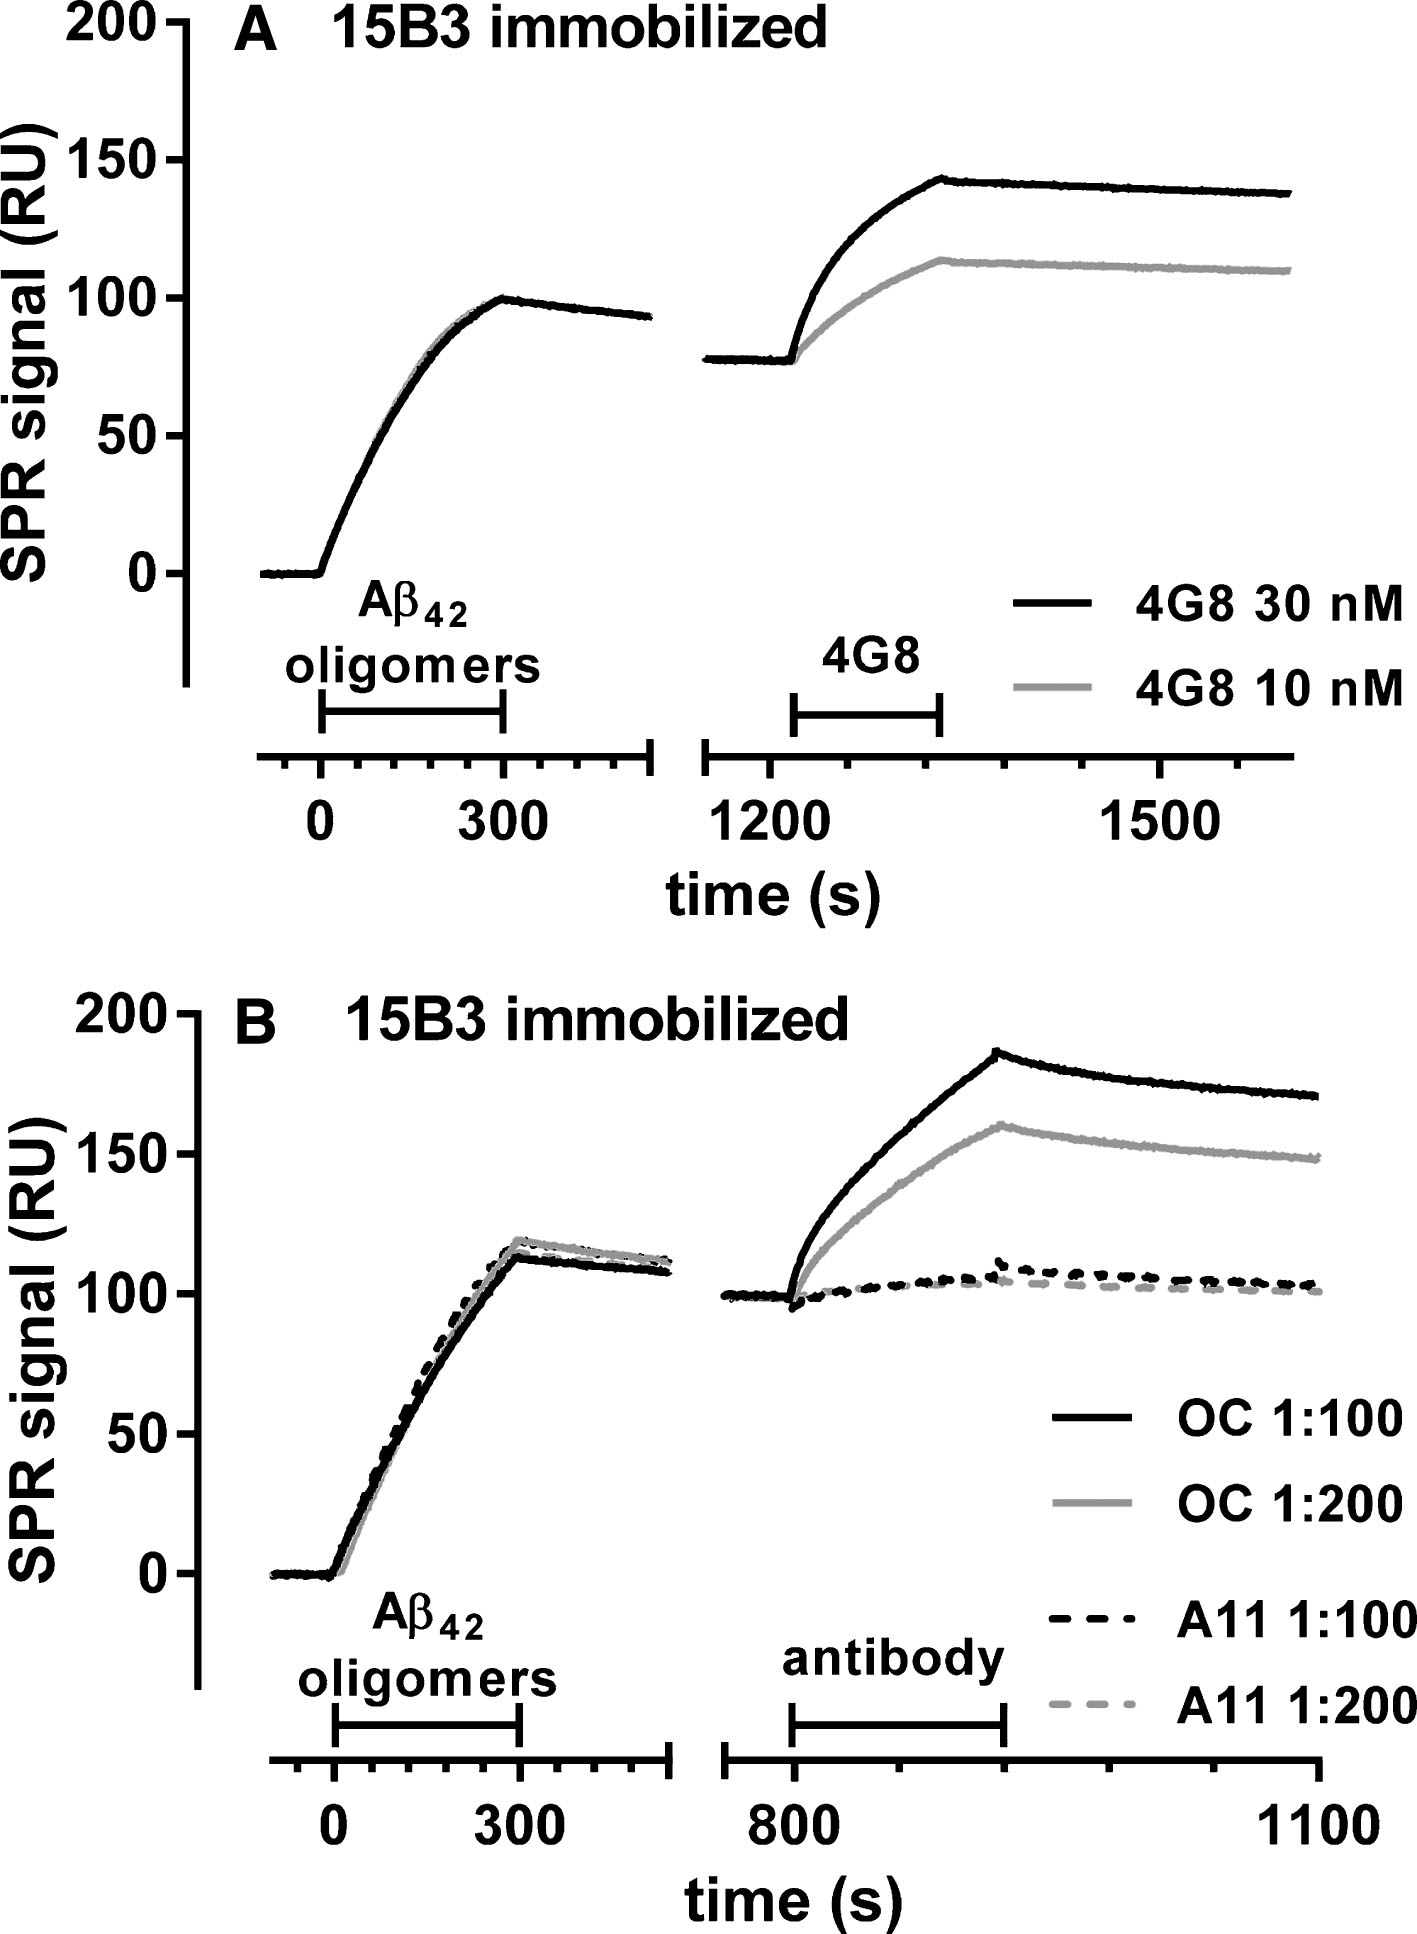 SPR studies showing binding of 4G8 and OC, but not A11, to 15B3-captured Aβ42 oligomers—Synthetic Aβ42 (100 μM) was incubated at 25°C, sampled after 5 h, diluted to 1 μM in 10 mM PBS, pH 7.4, and injected over immobilized 15B3 (batch # 071114A) for 5 min, followed by injection of two different concentrations of 4G8 (A), OC or A11 (B) antibodies for 2 min (bars). The binding of 4G8 to captured oligomers (A) confirms the data shown in Fig. 1D. The experiment shown in B was replicated three times with very similar results.